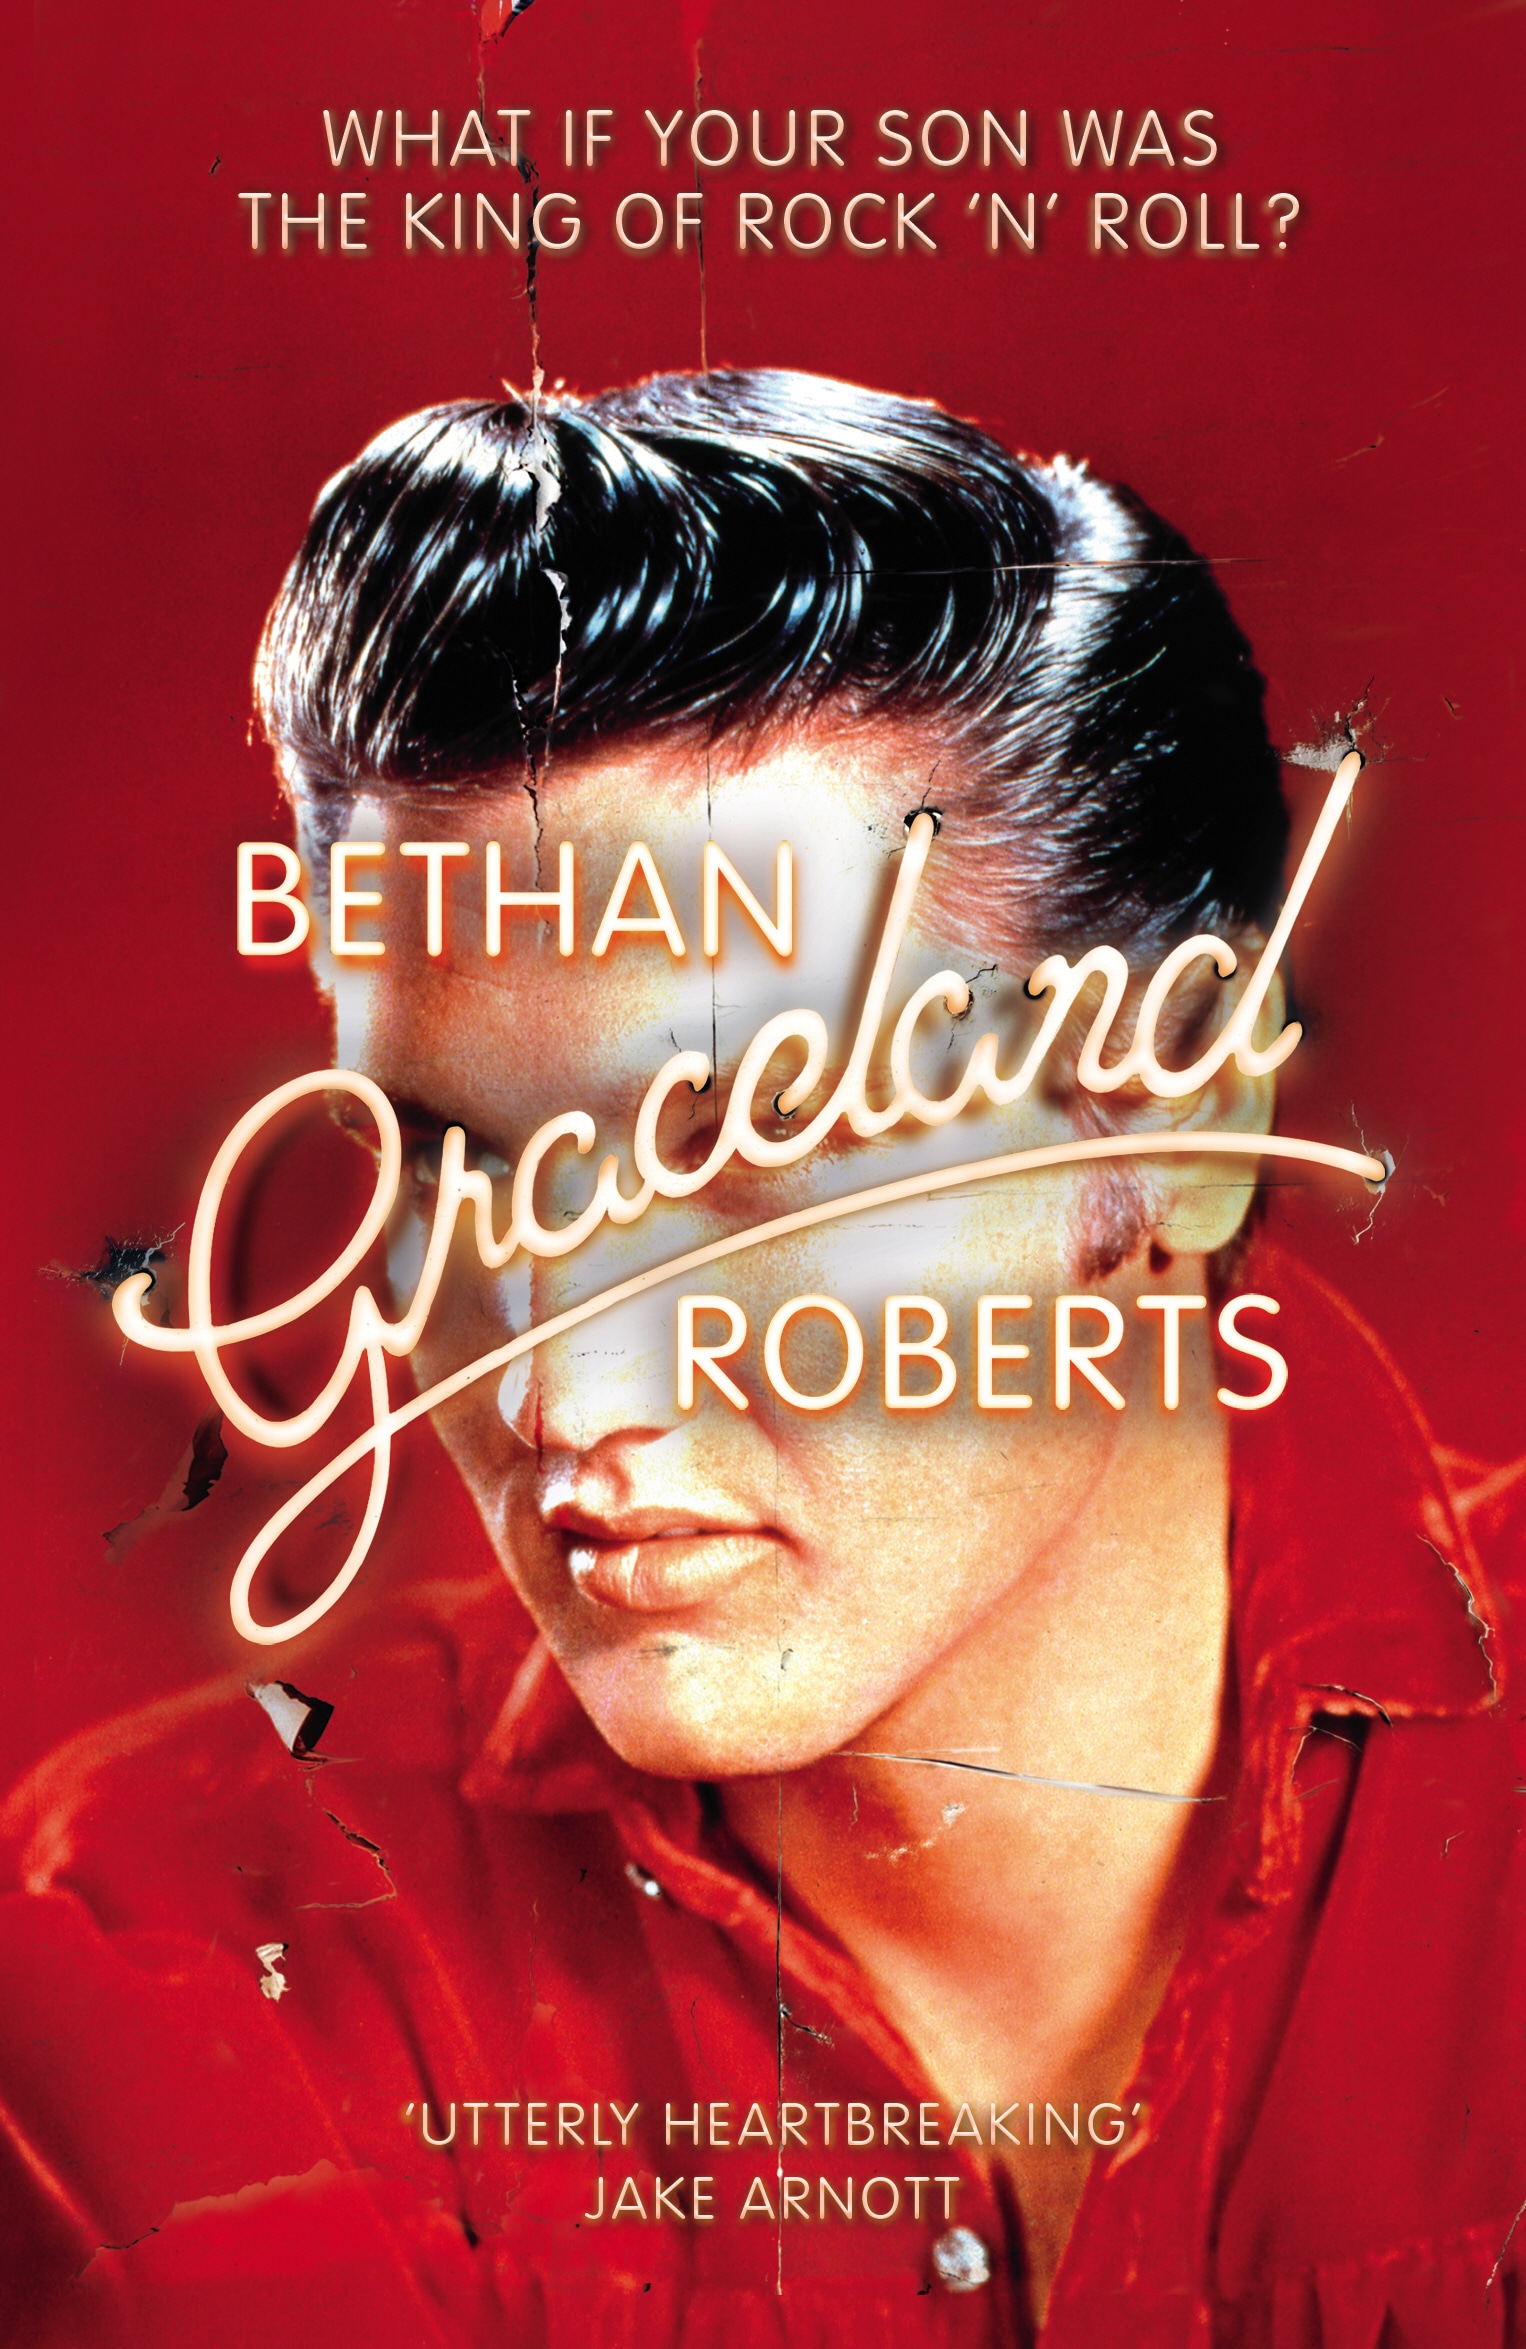 Book “Graceland” by Bethan Roberts — February 13, 2020